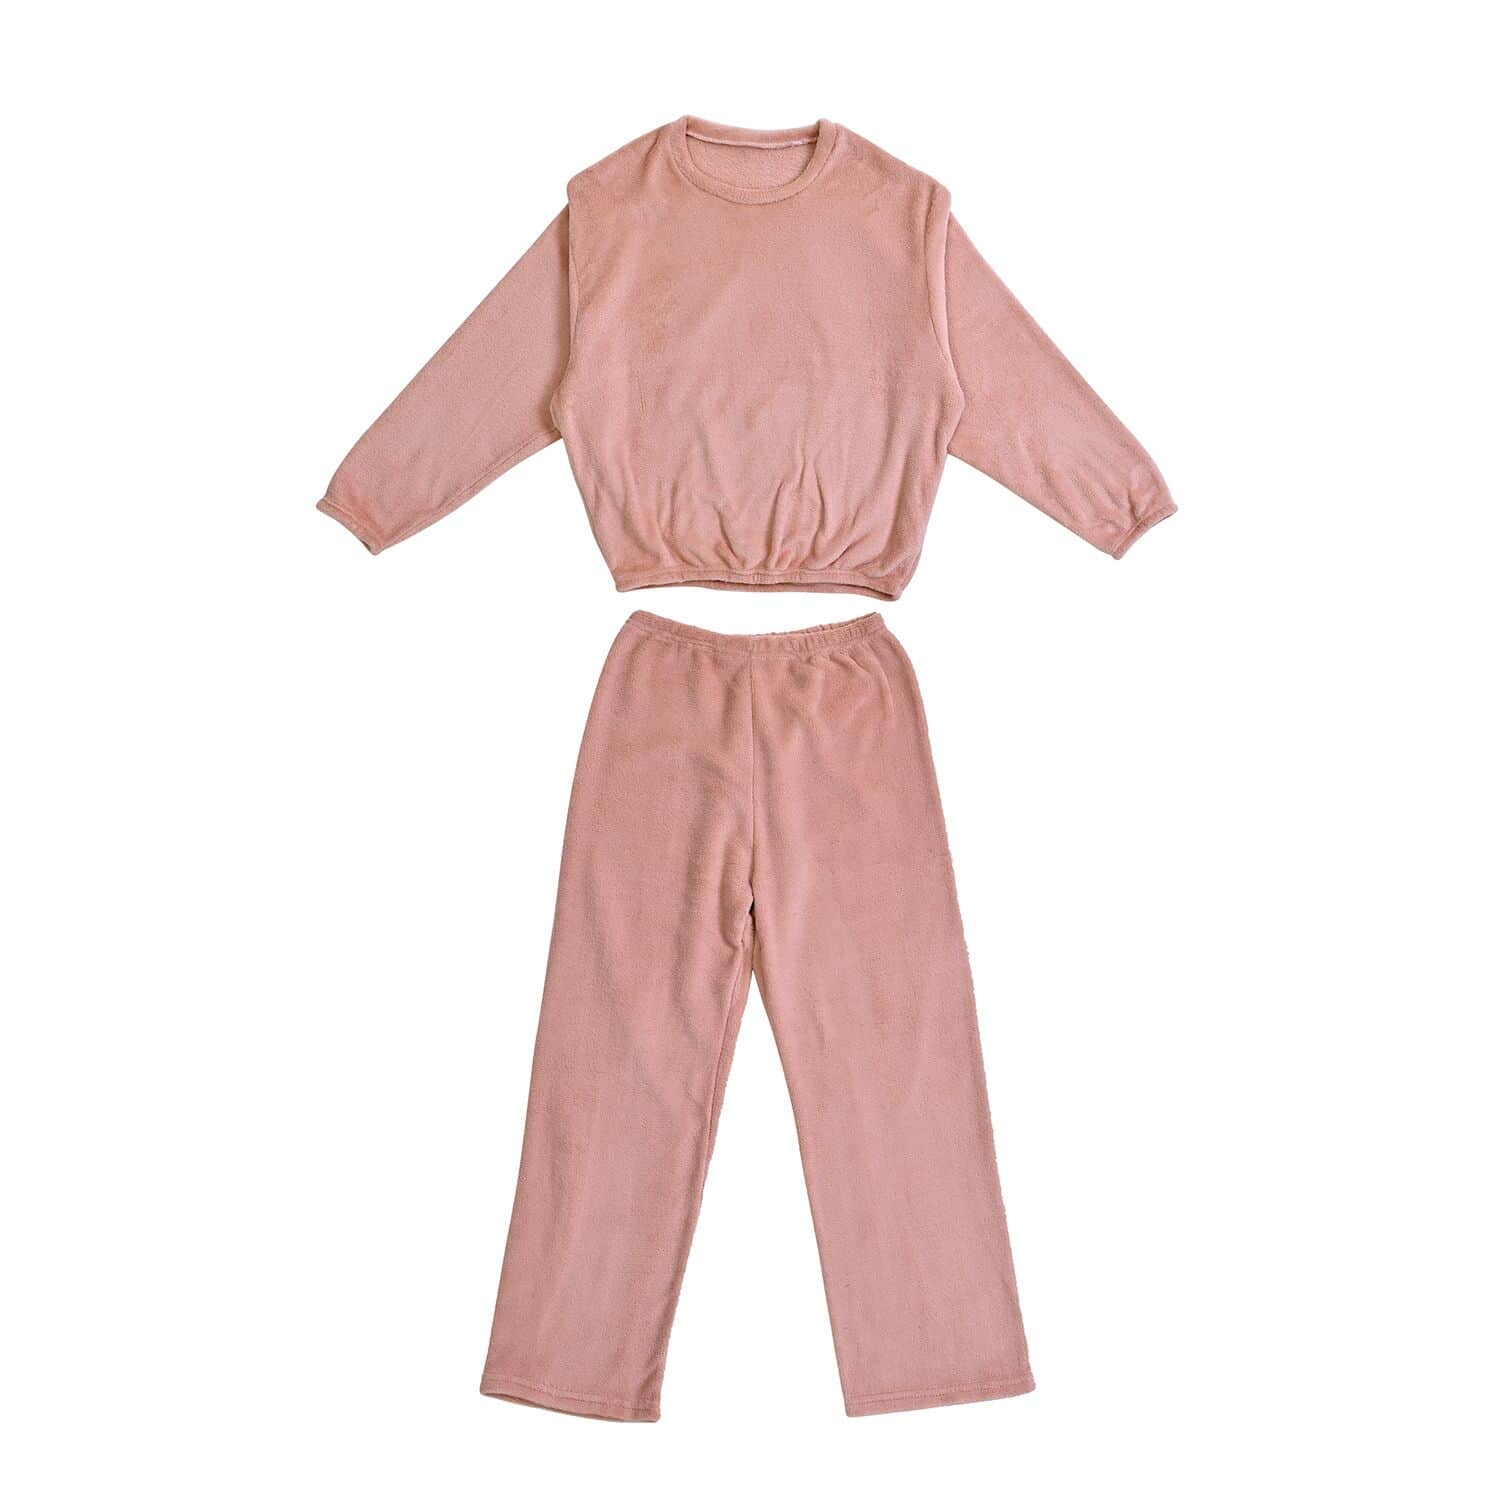 Buy Tamsy Blush Fleece Lounge Set - One Size Fits Most at ShopLC.